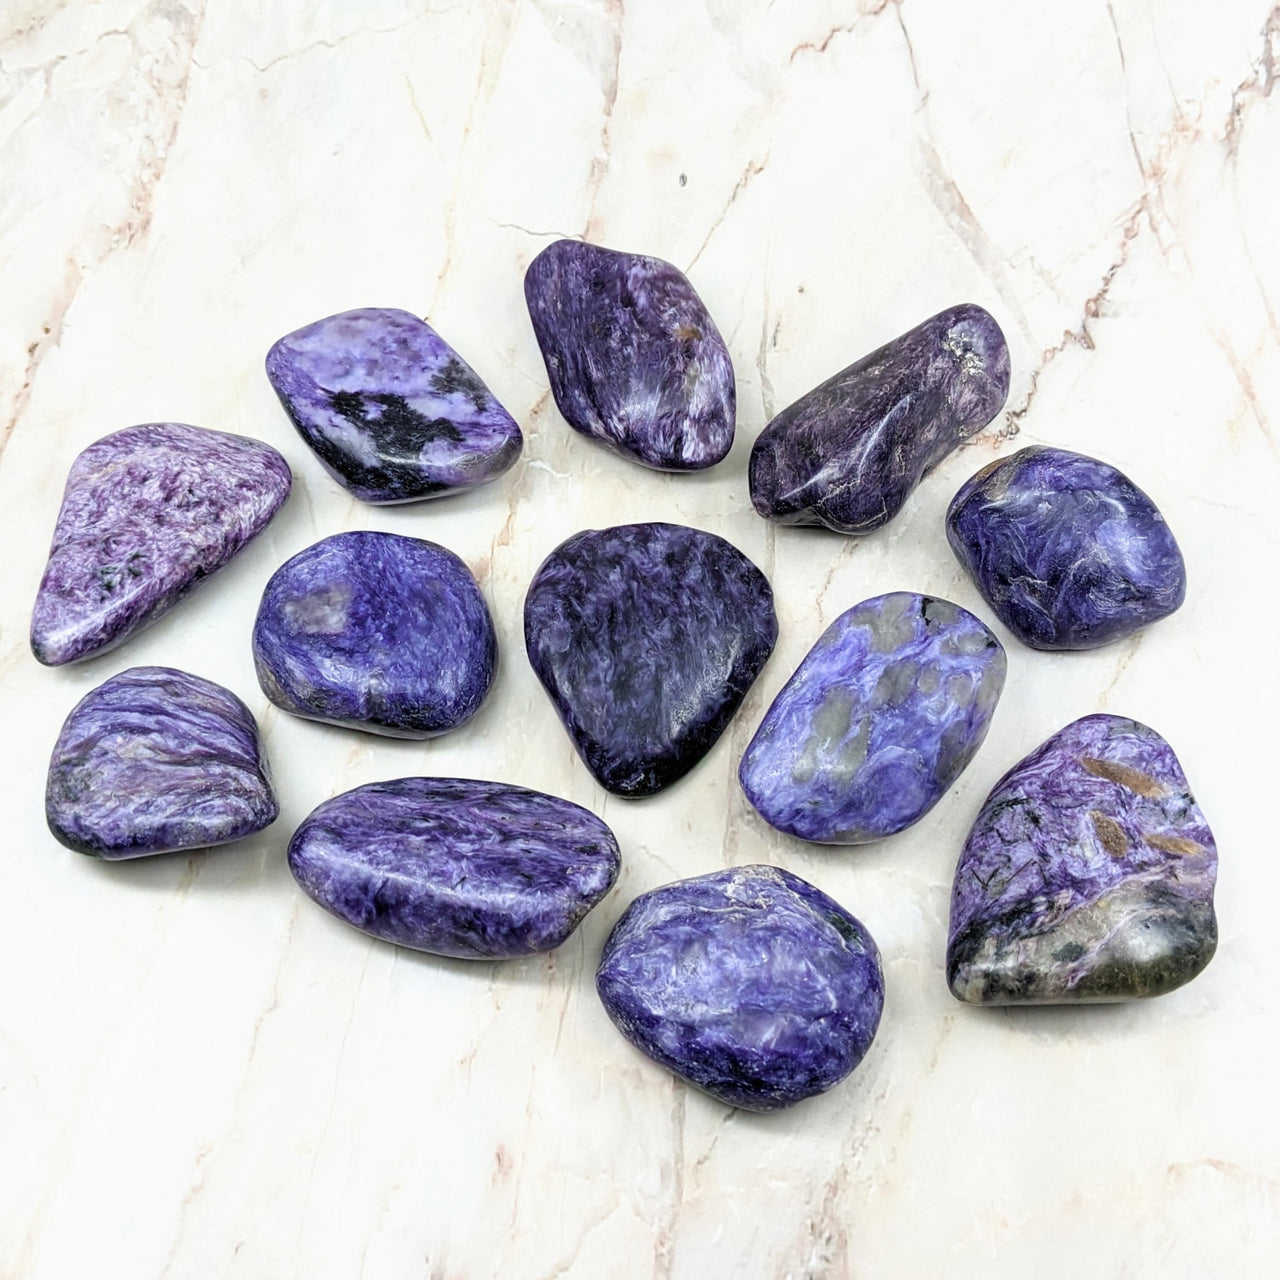 Close up of Charoite Tumbled Stones #SK2183 on marble surface